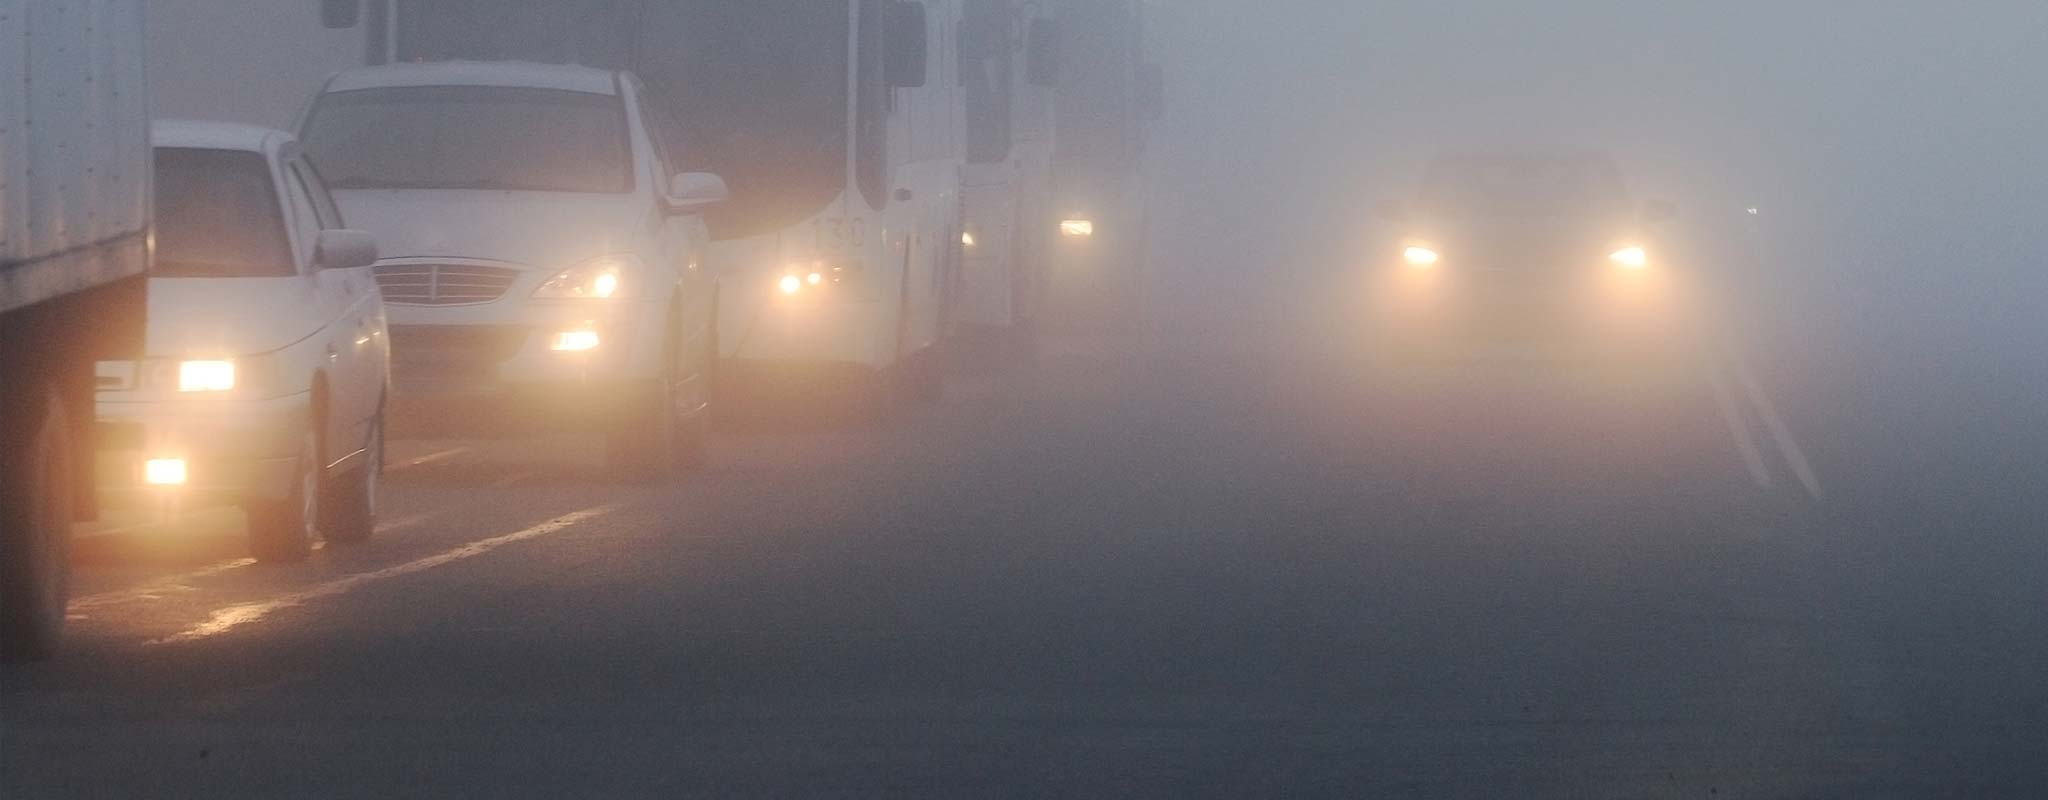 Vehicles on a foggy highway.